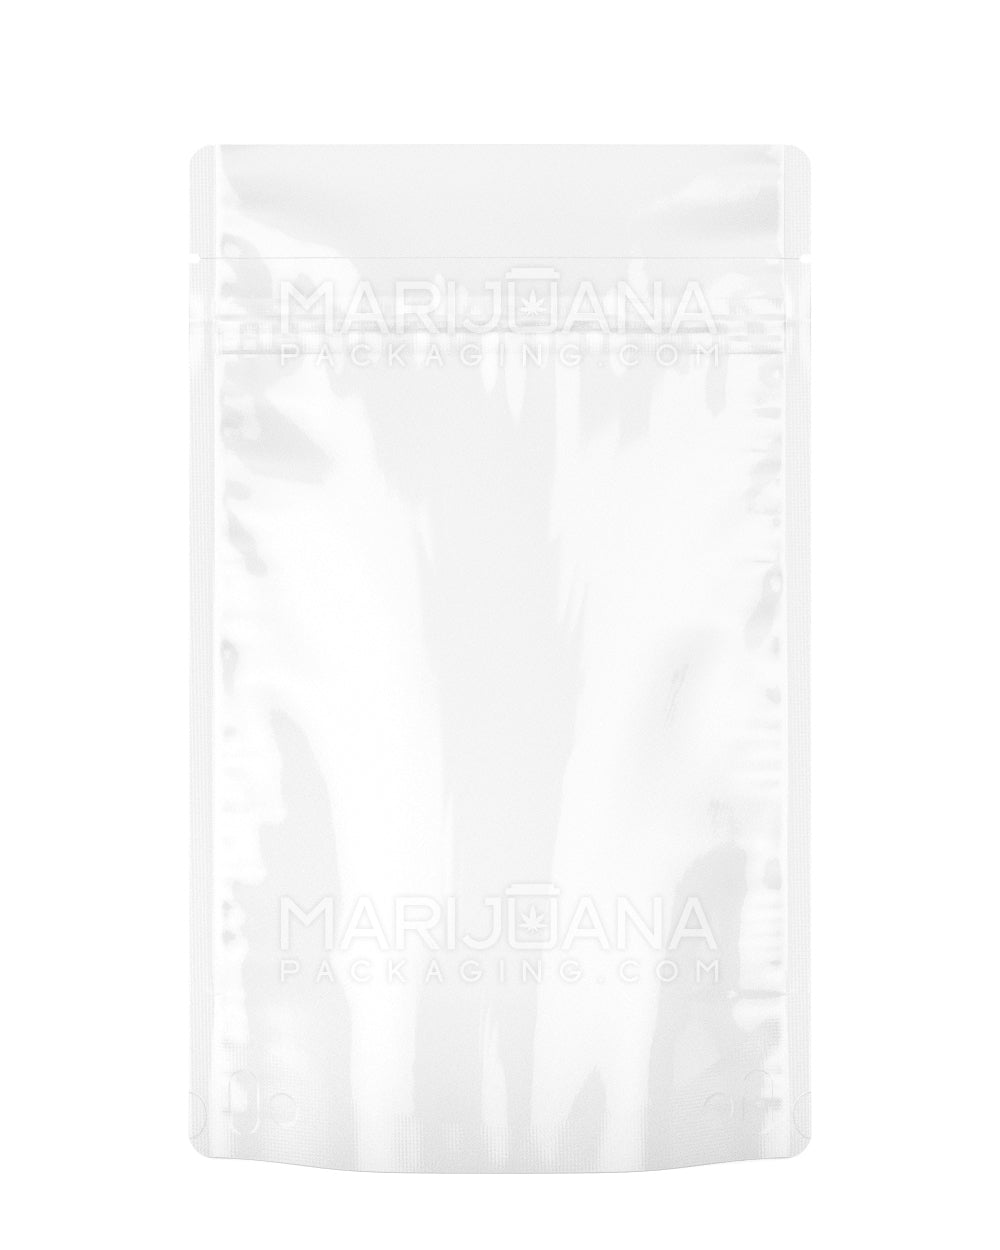 Tamper Evident | Glossy White Mylar Bag (Tear Notch) | 6in x 9.3in - 28g - 1000 Count